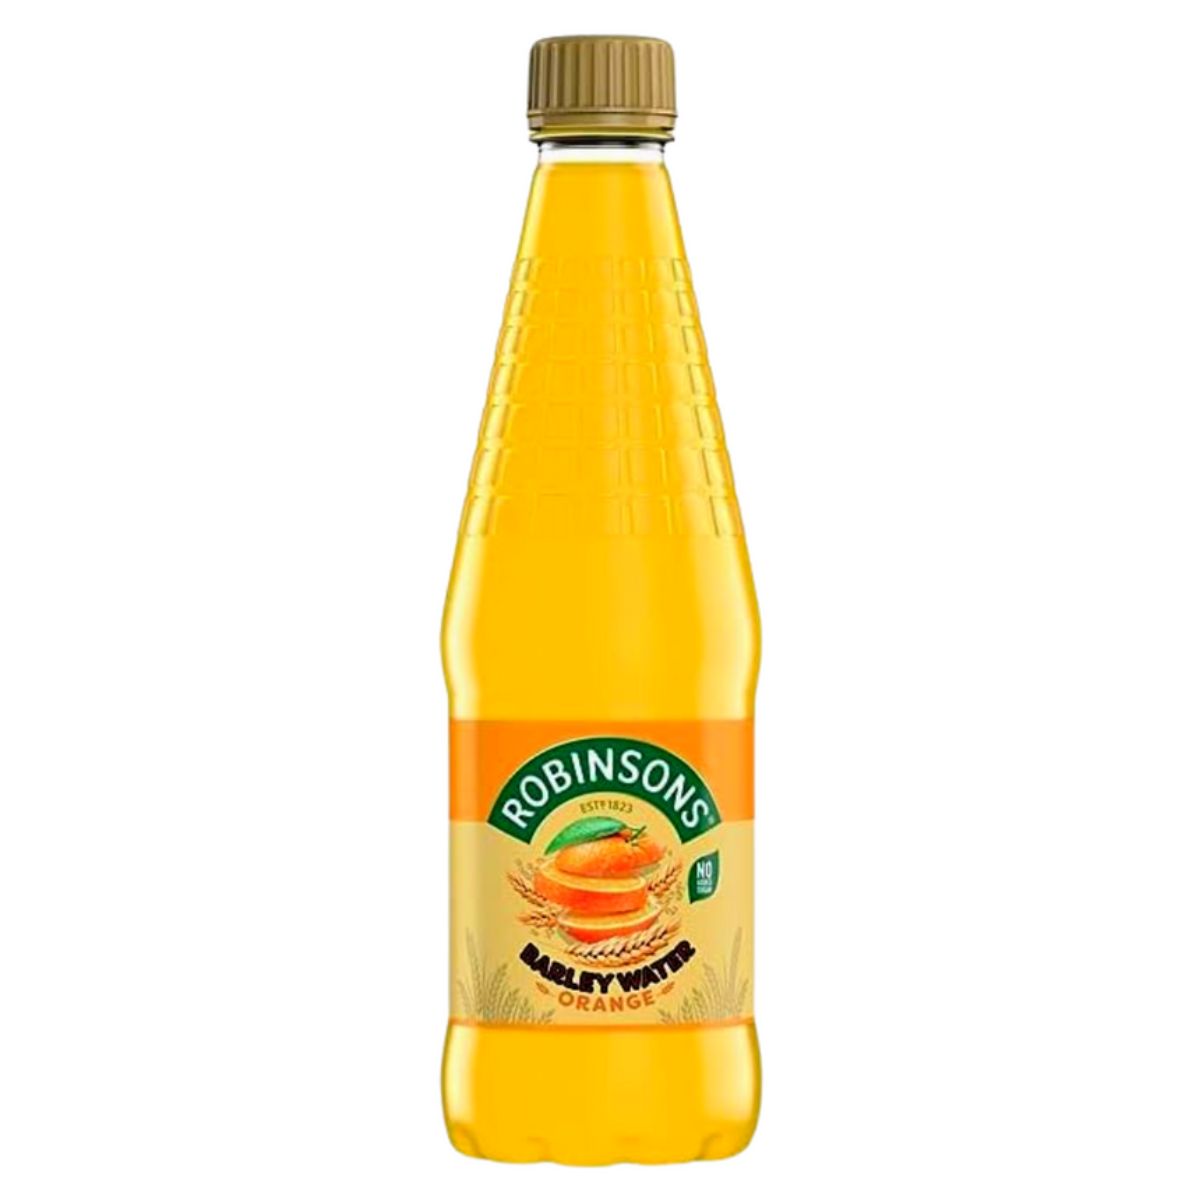 A bottle of Robinsons - Orange Barley Water - 850ml on a white background.